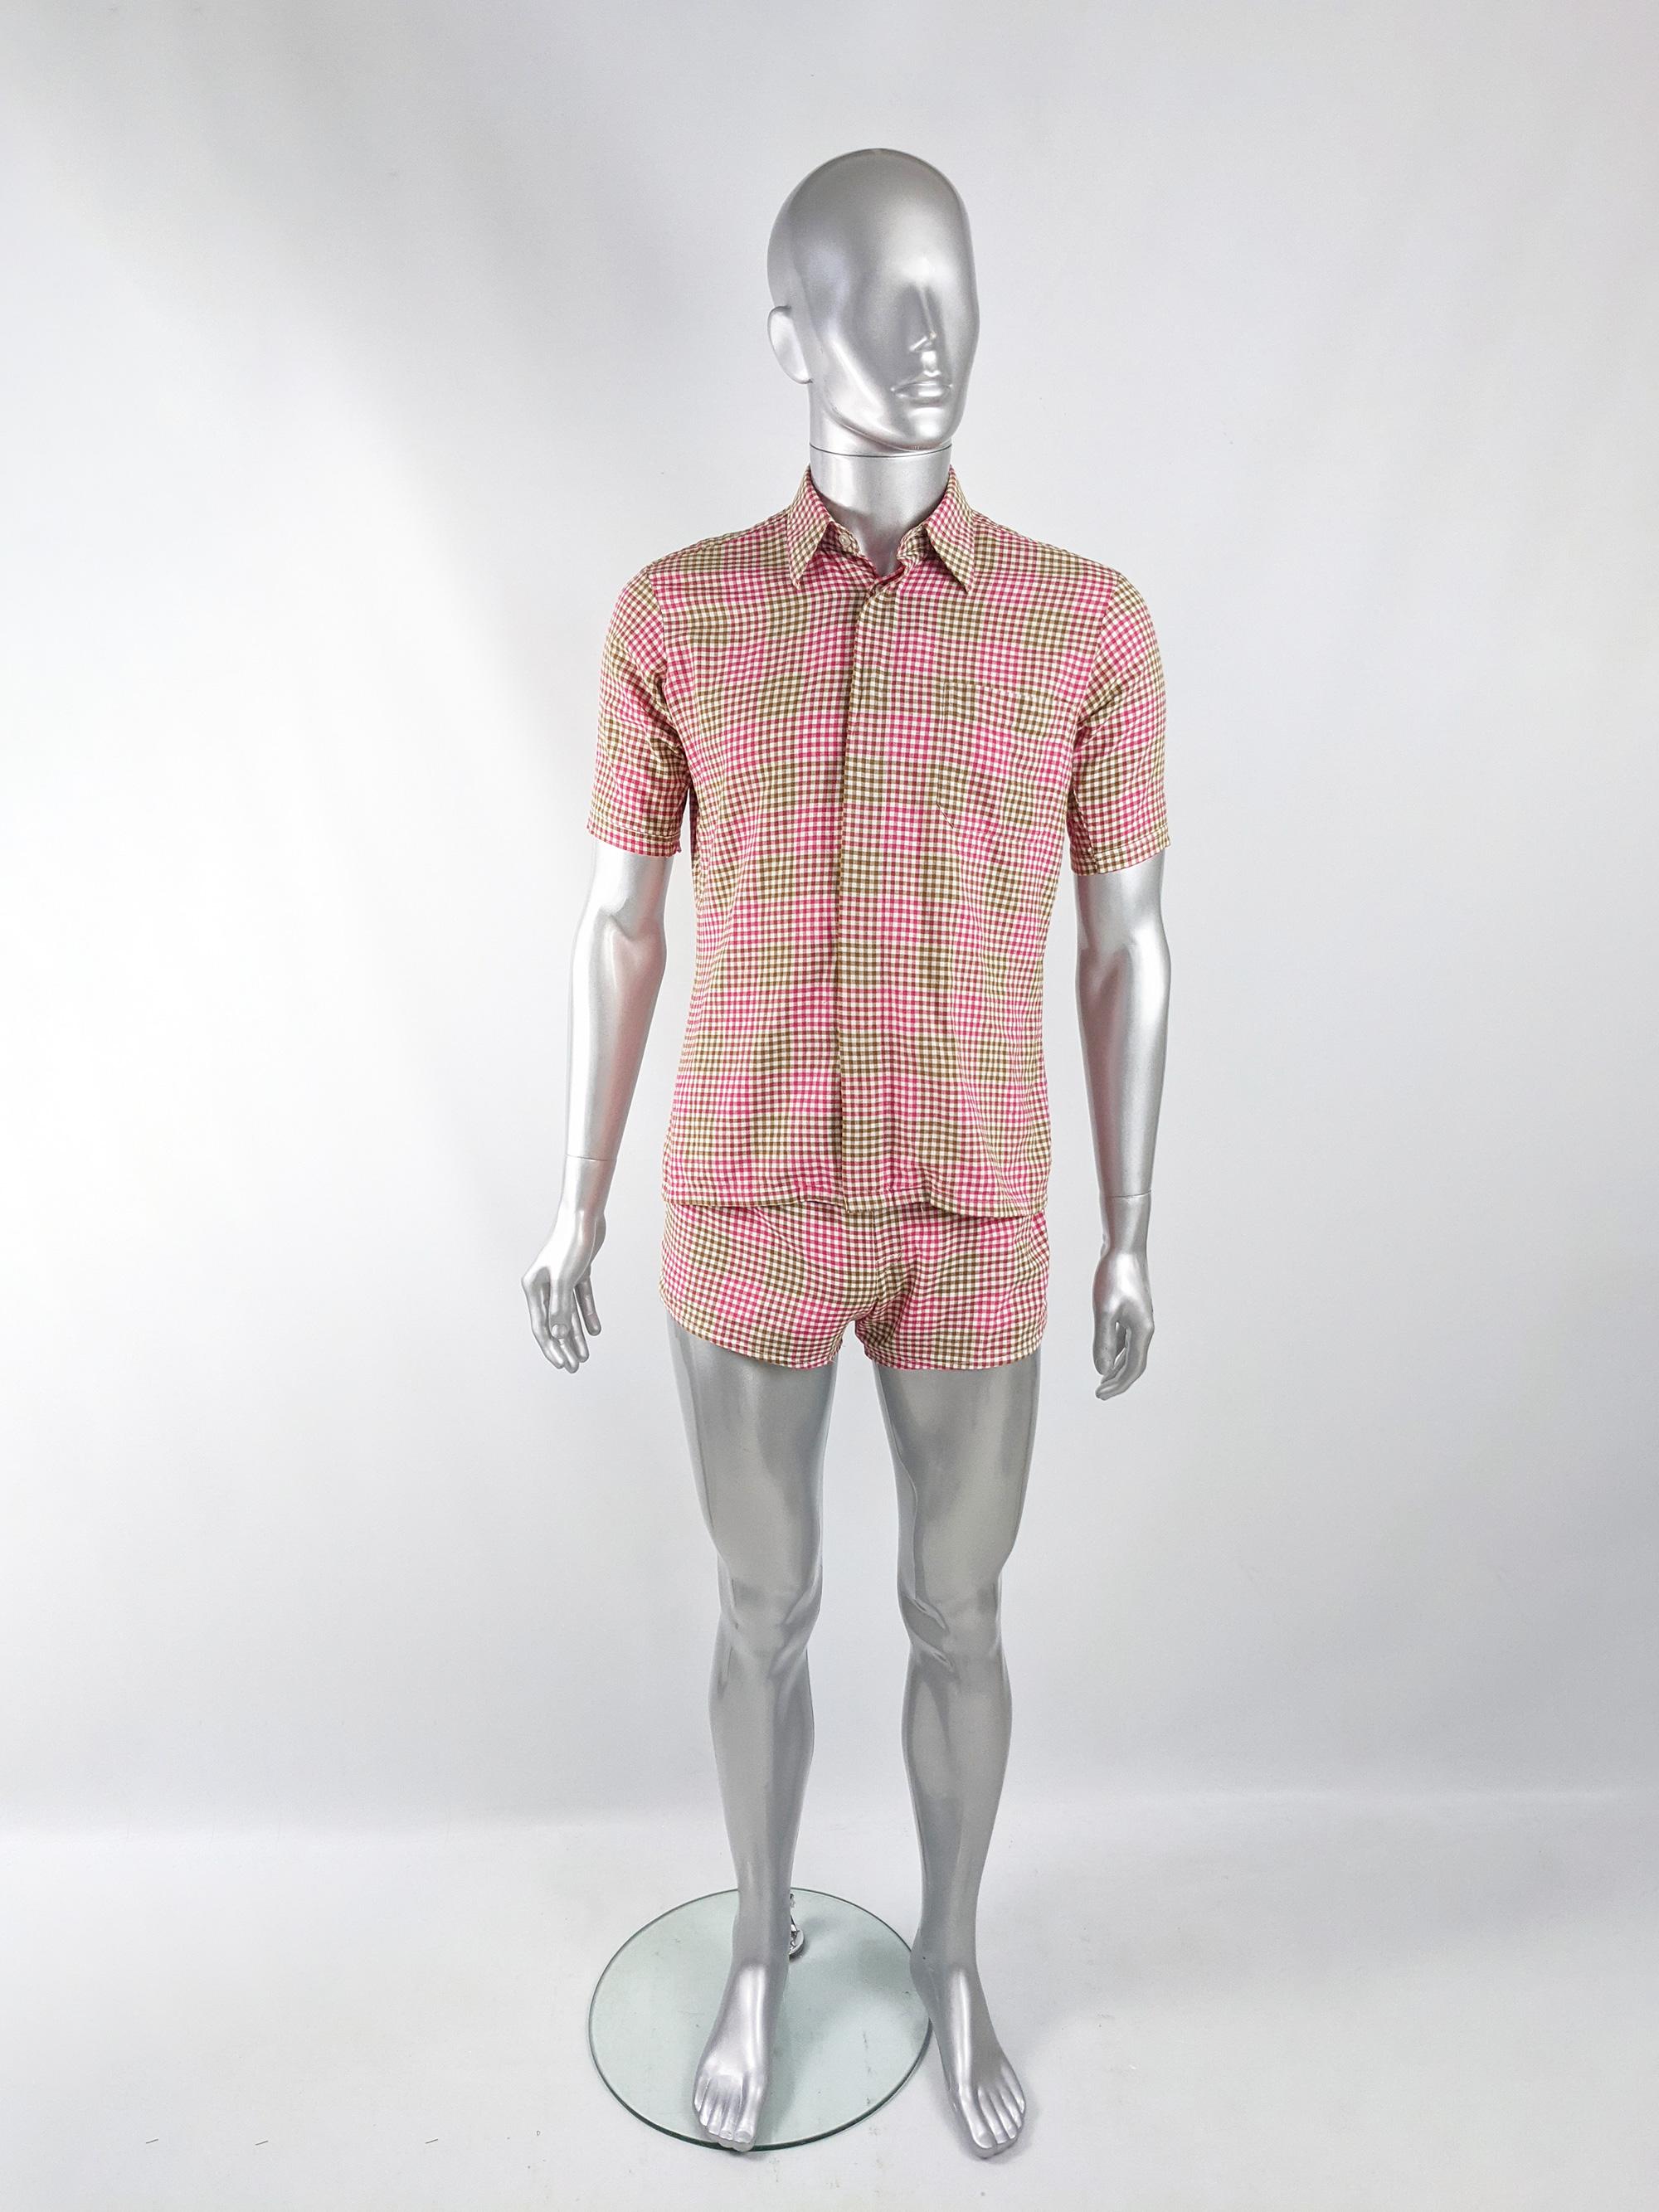 An incredible and rare vintage mens 2 piece swim suit from the 60s by luxury British department store, Harrods. In a white, pink and green gingham check cotton, it consists of a matching shirt and mesh lined swim shorts. Perfect for collectors or